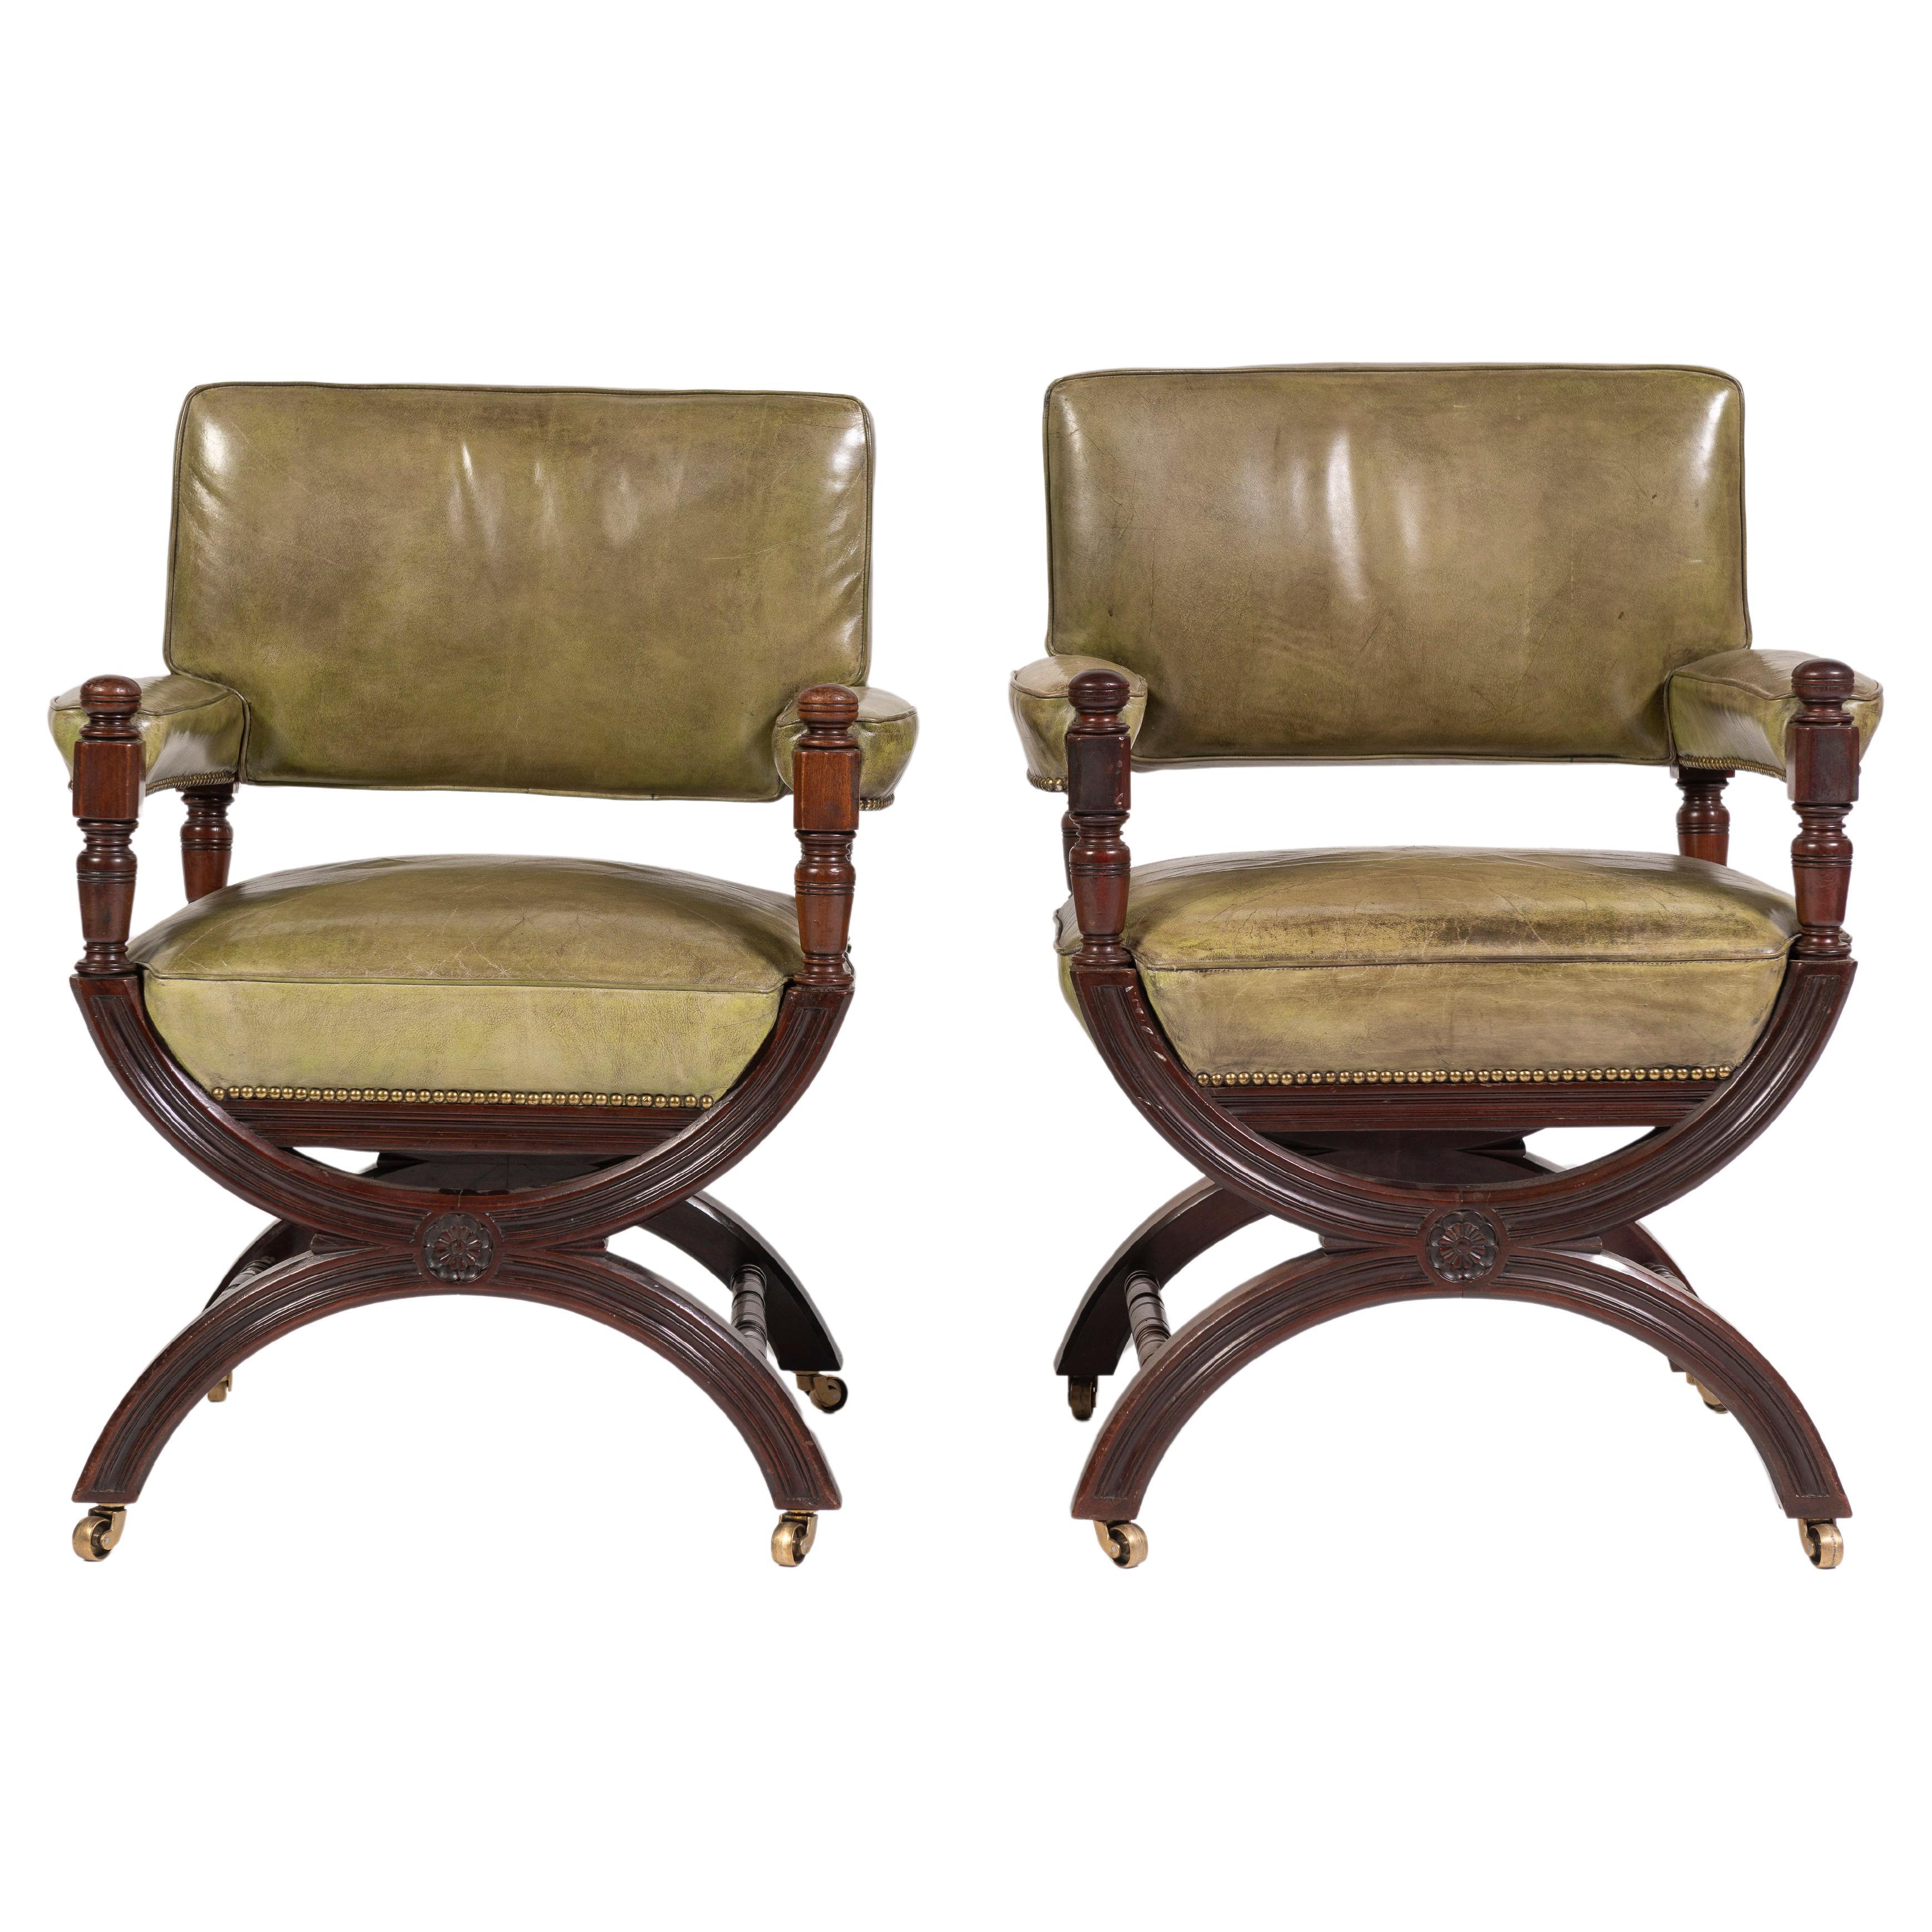 Pair of 19th Century English Leather and Mahogany Armchairs For Sale